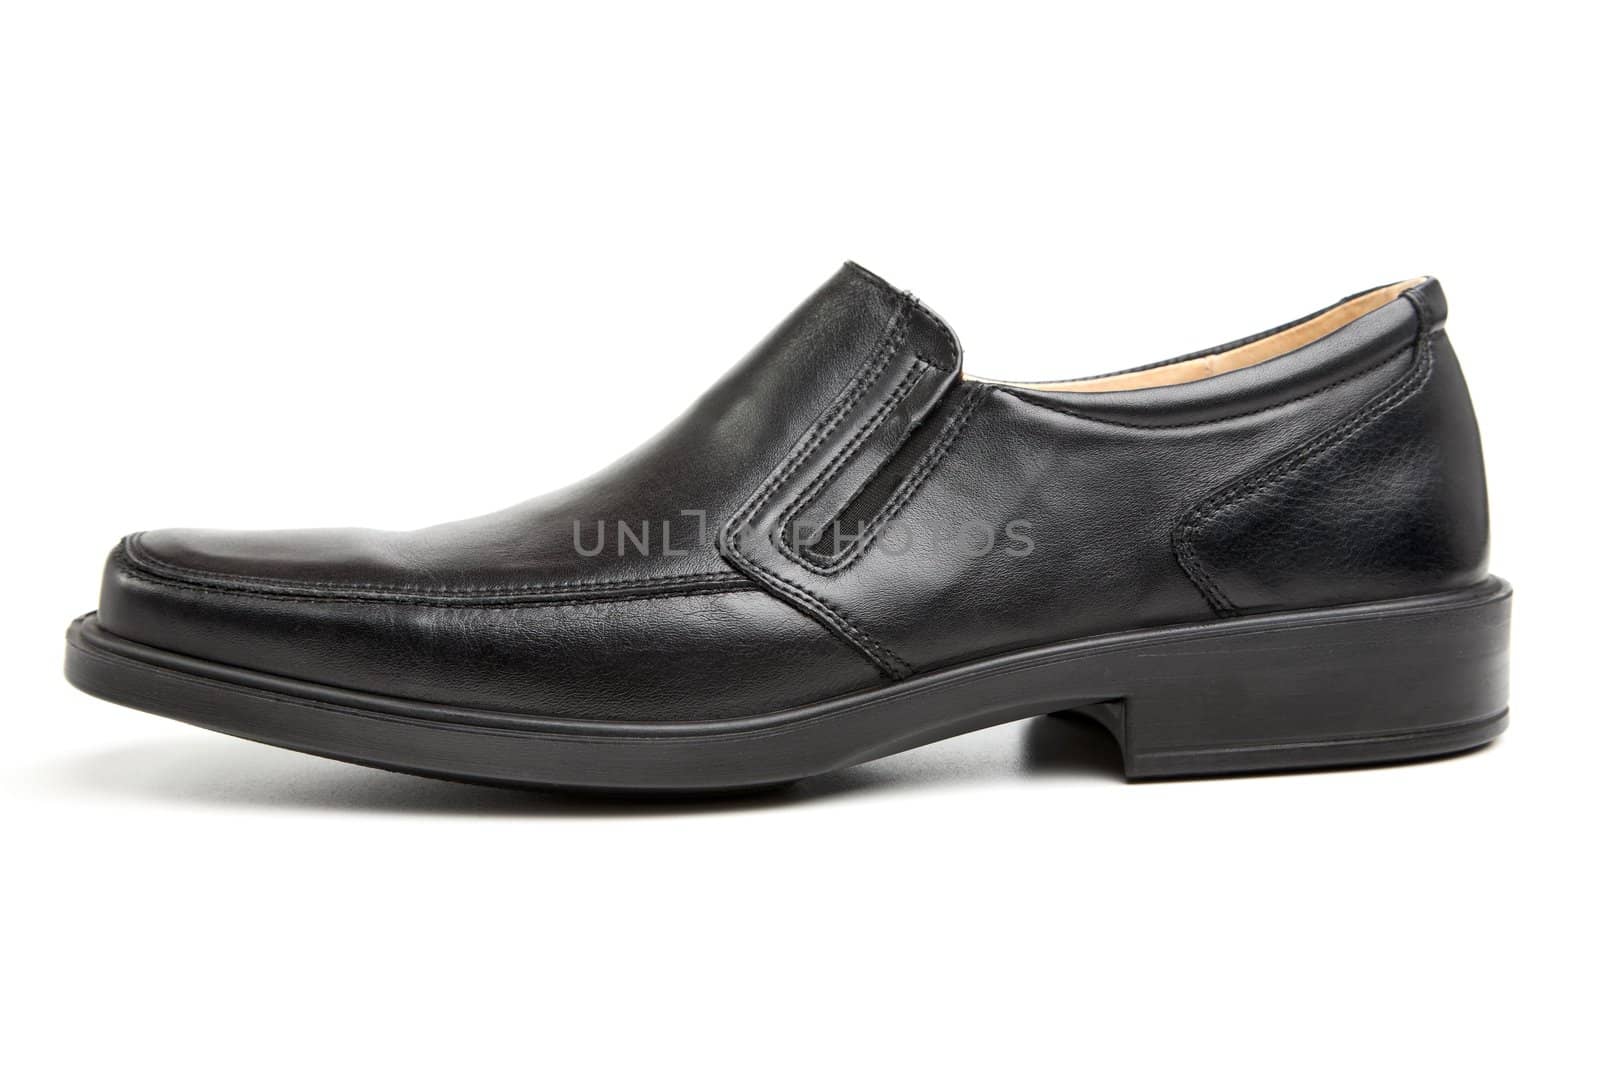 black man's shoes on a white background